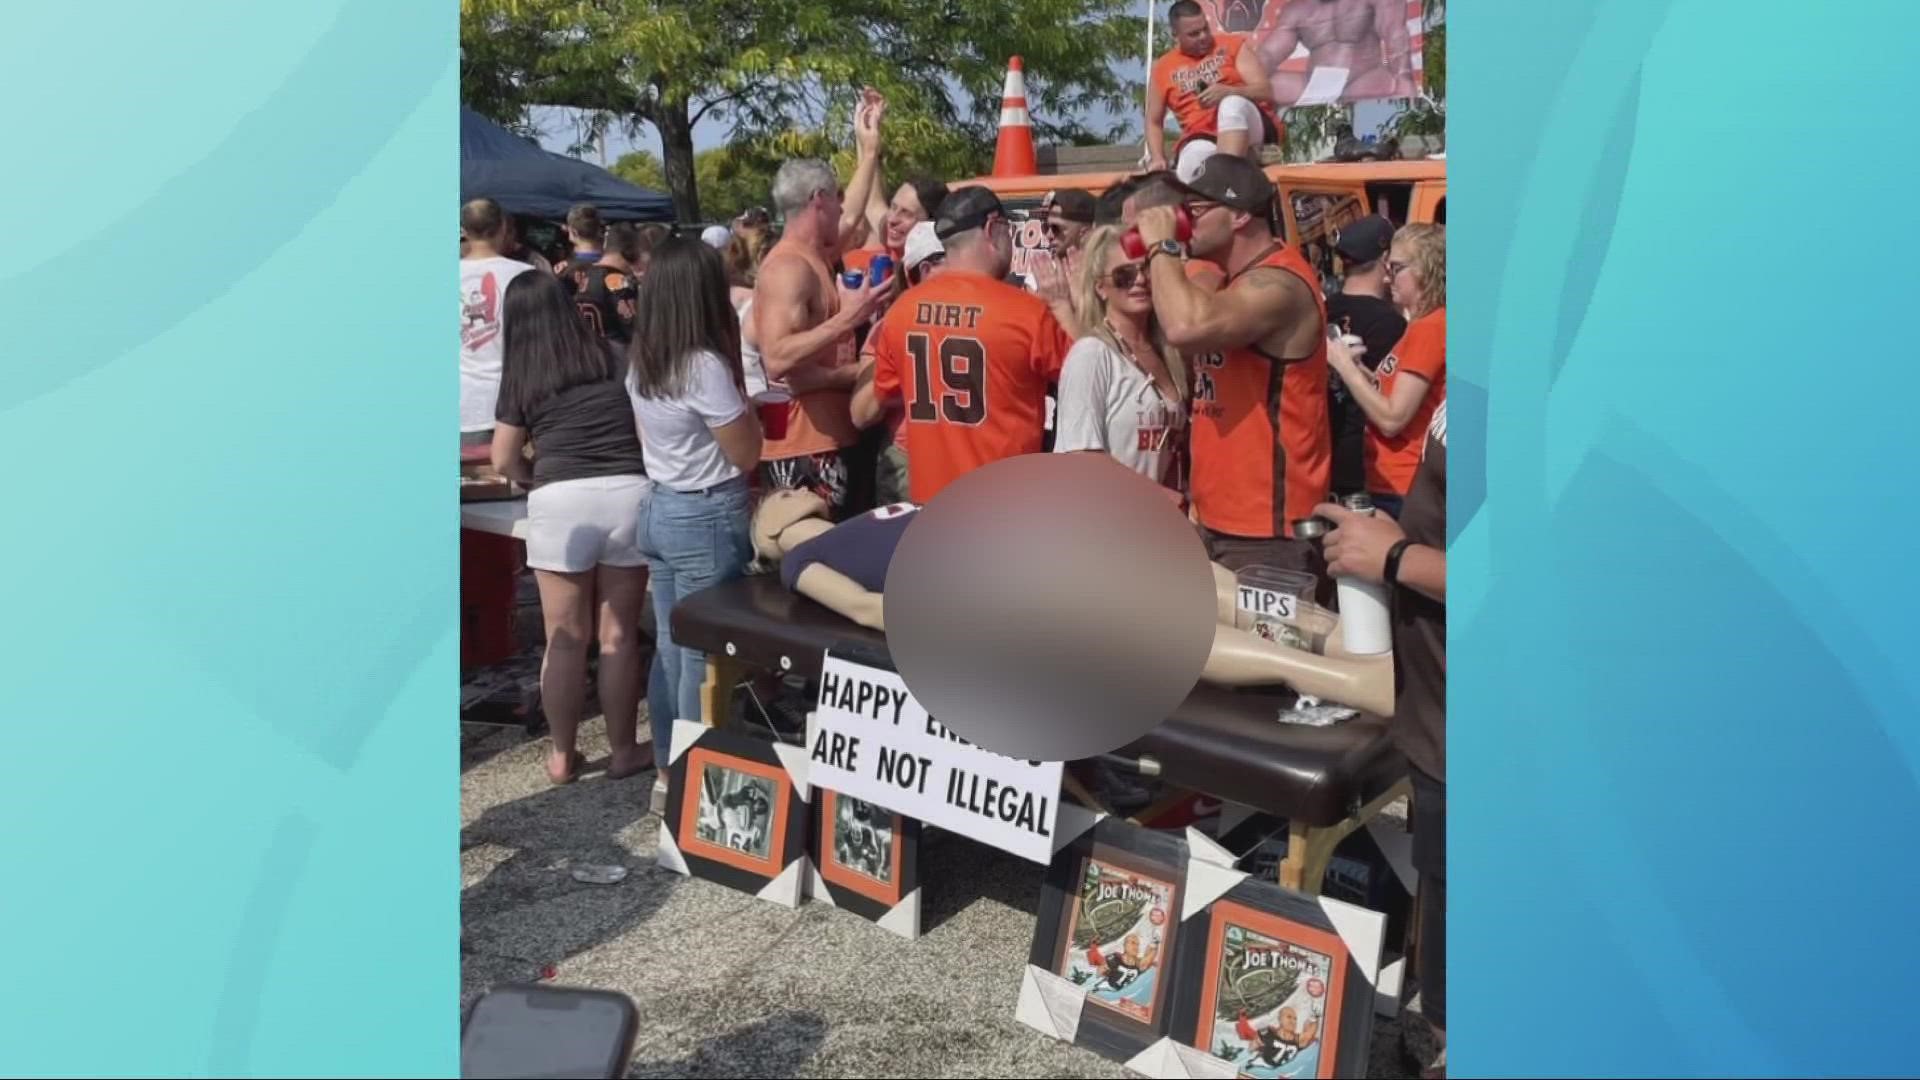 An offensive image from the Muni Lot was shared across social medial last week, and one fan was banned from the stadium after throwing a bottle at Jimmy Haslam.